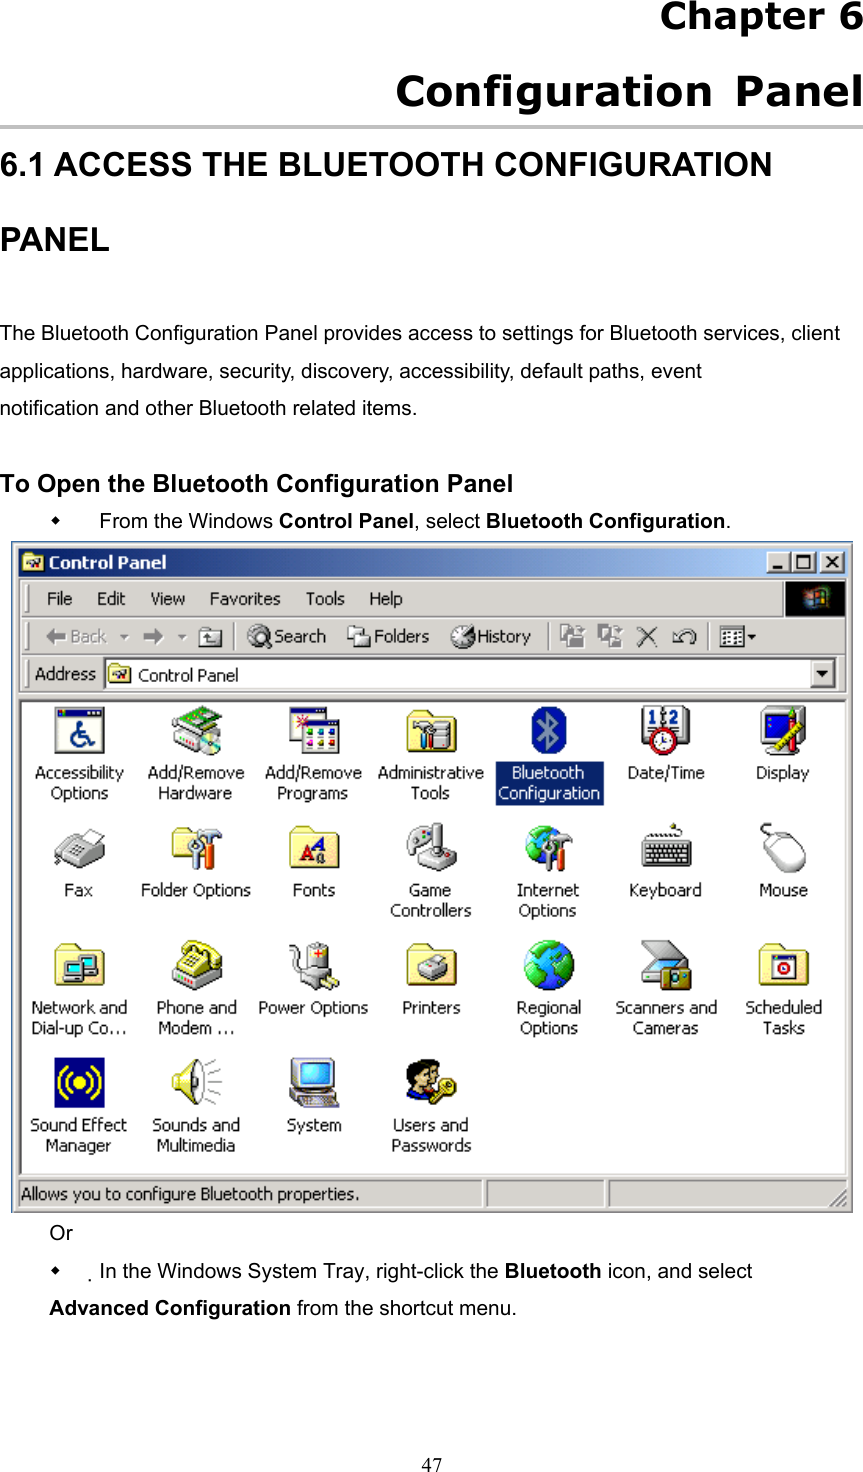  47 Chapter 6   Configuration Panel 6.1 ACCESS THE BLUETOOTH CONFIGURATION PANEL  The Bluetooth Configuration Panel provides access to settings for Bluetooth services, client applications, hardware, security, discovery, accessibility, default paths, event notification and other Bluetooth related items.  To Open the Bluetooth Configuration Panel   From the Windows Control Panel, select Bluetooth Configuration.  Or   In the Windows System Tray, right-click the Bluetooth icon, and select Advanced Configuration from the shortcut menu. 